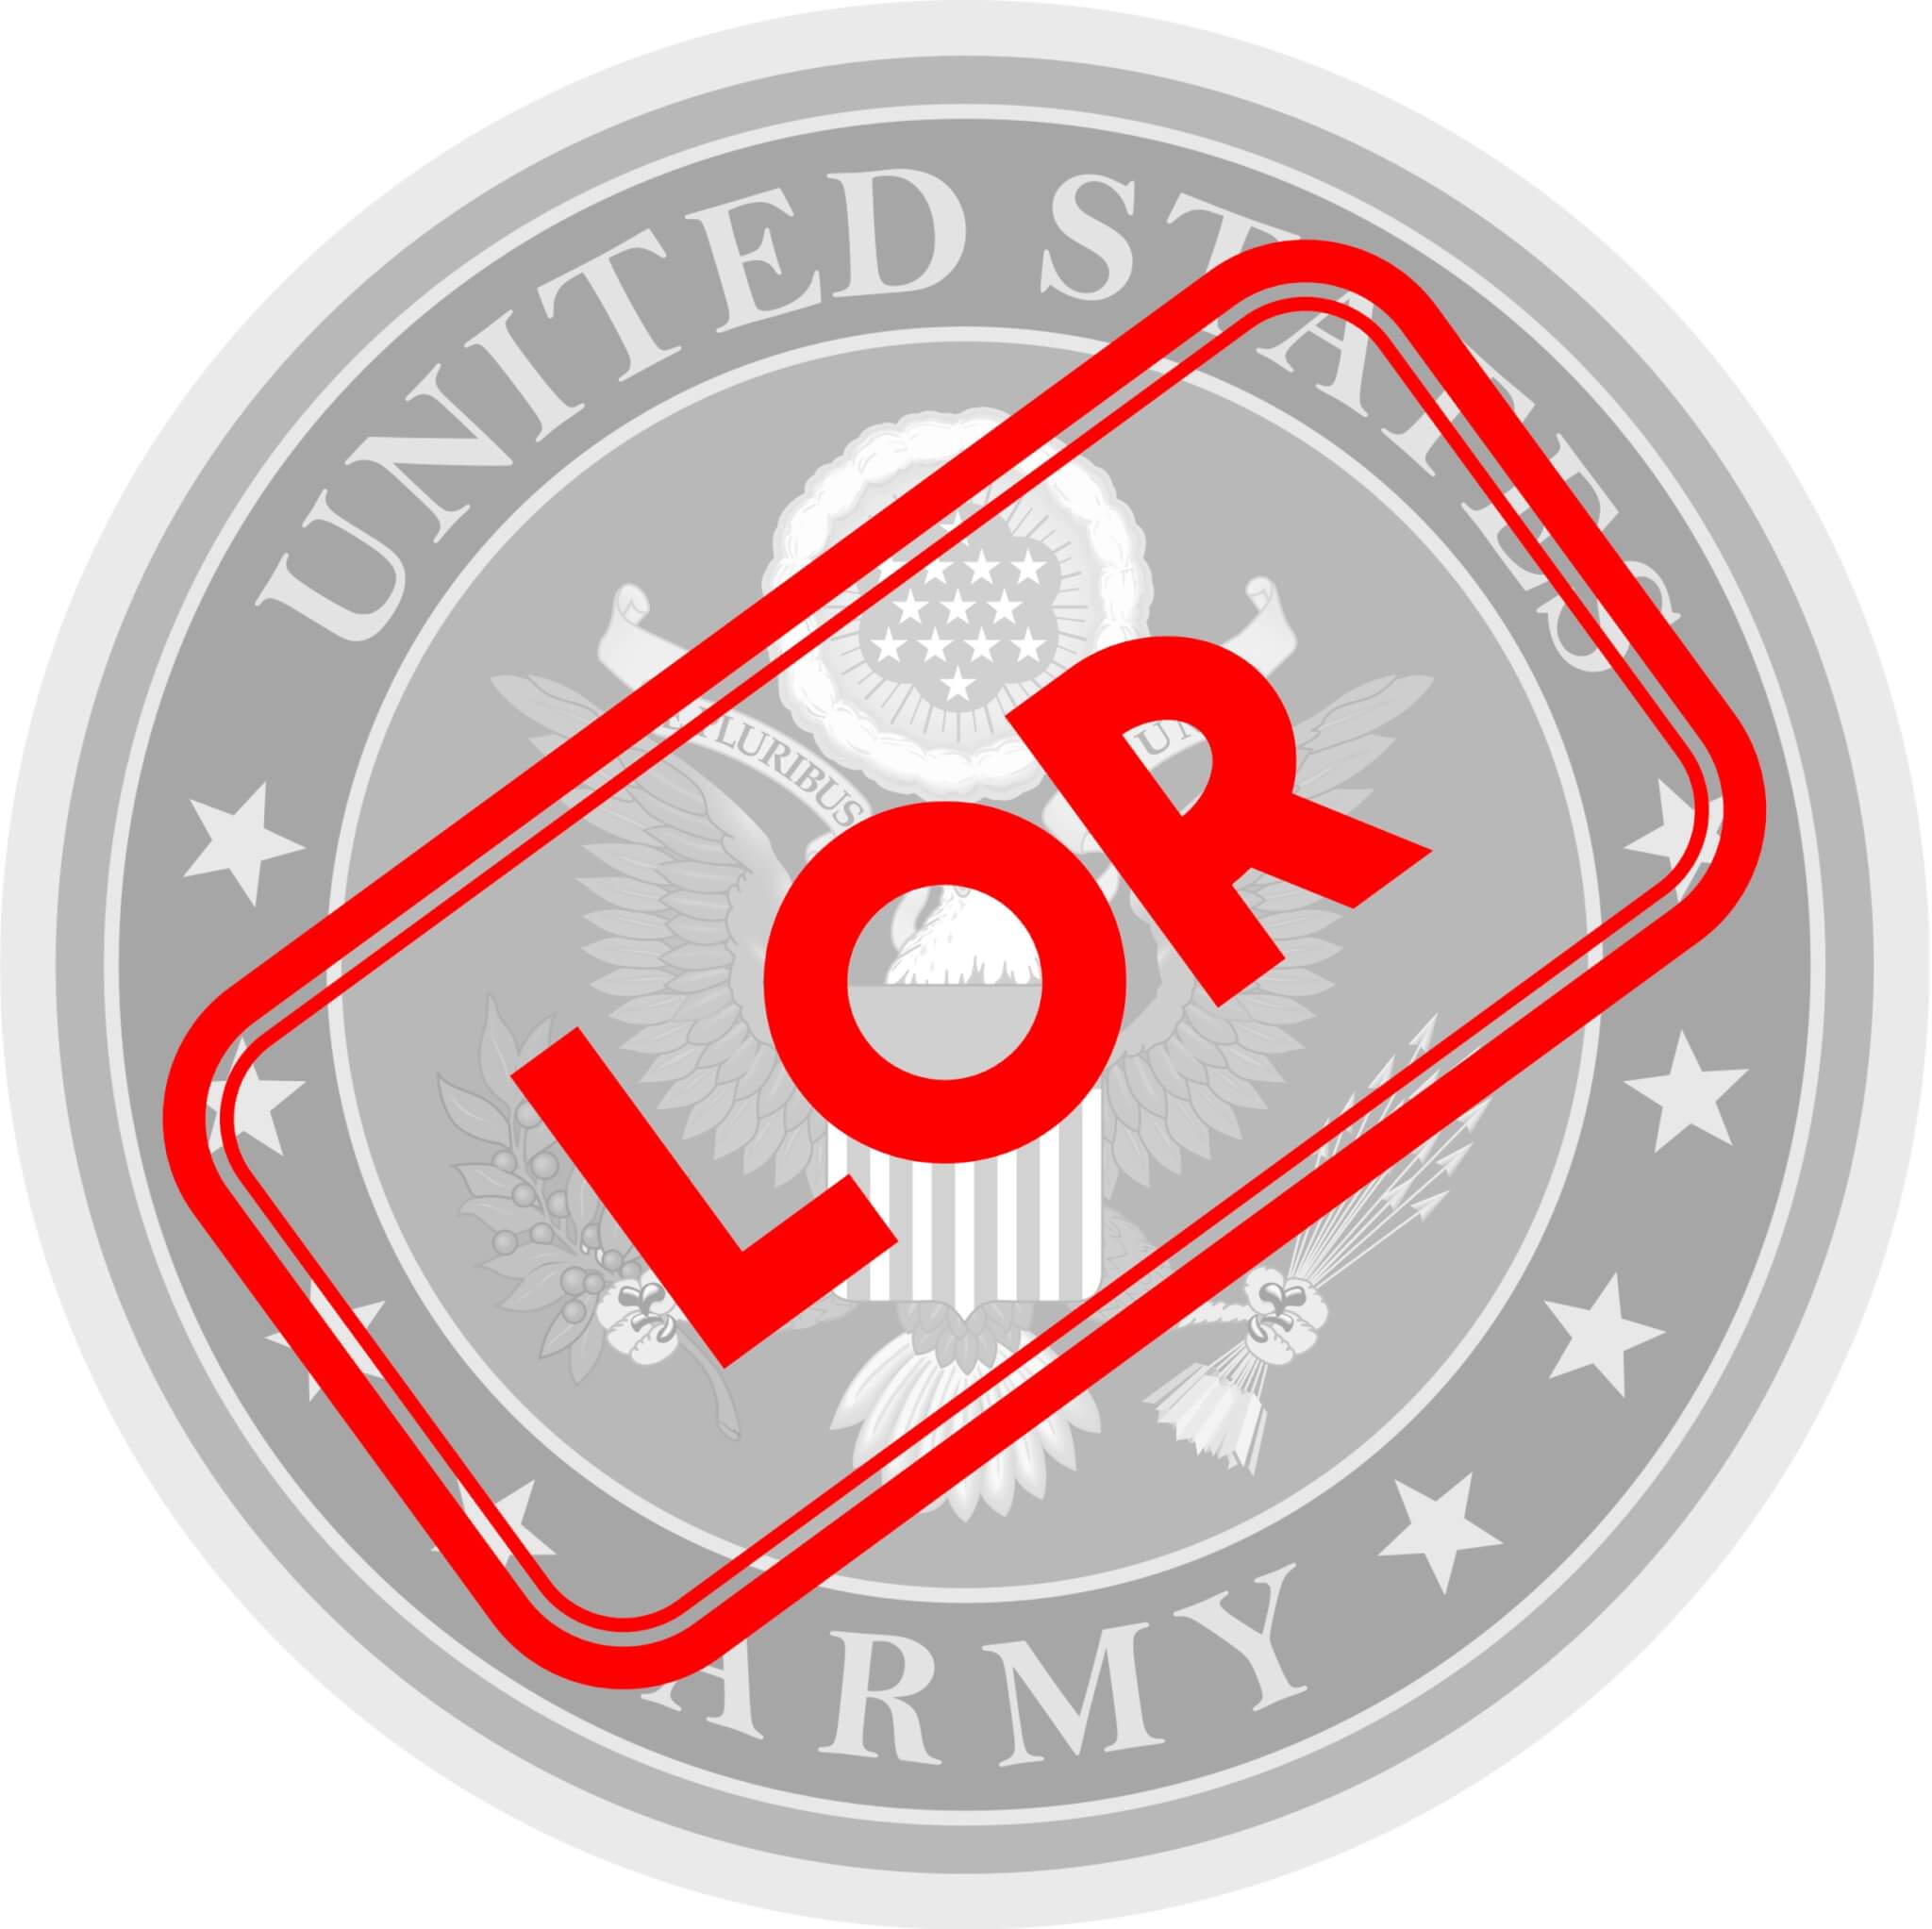 Army LOR Response Template